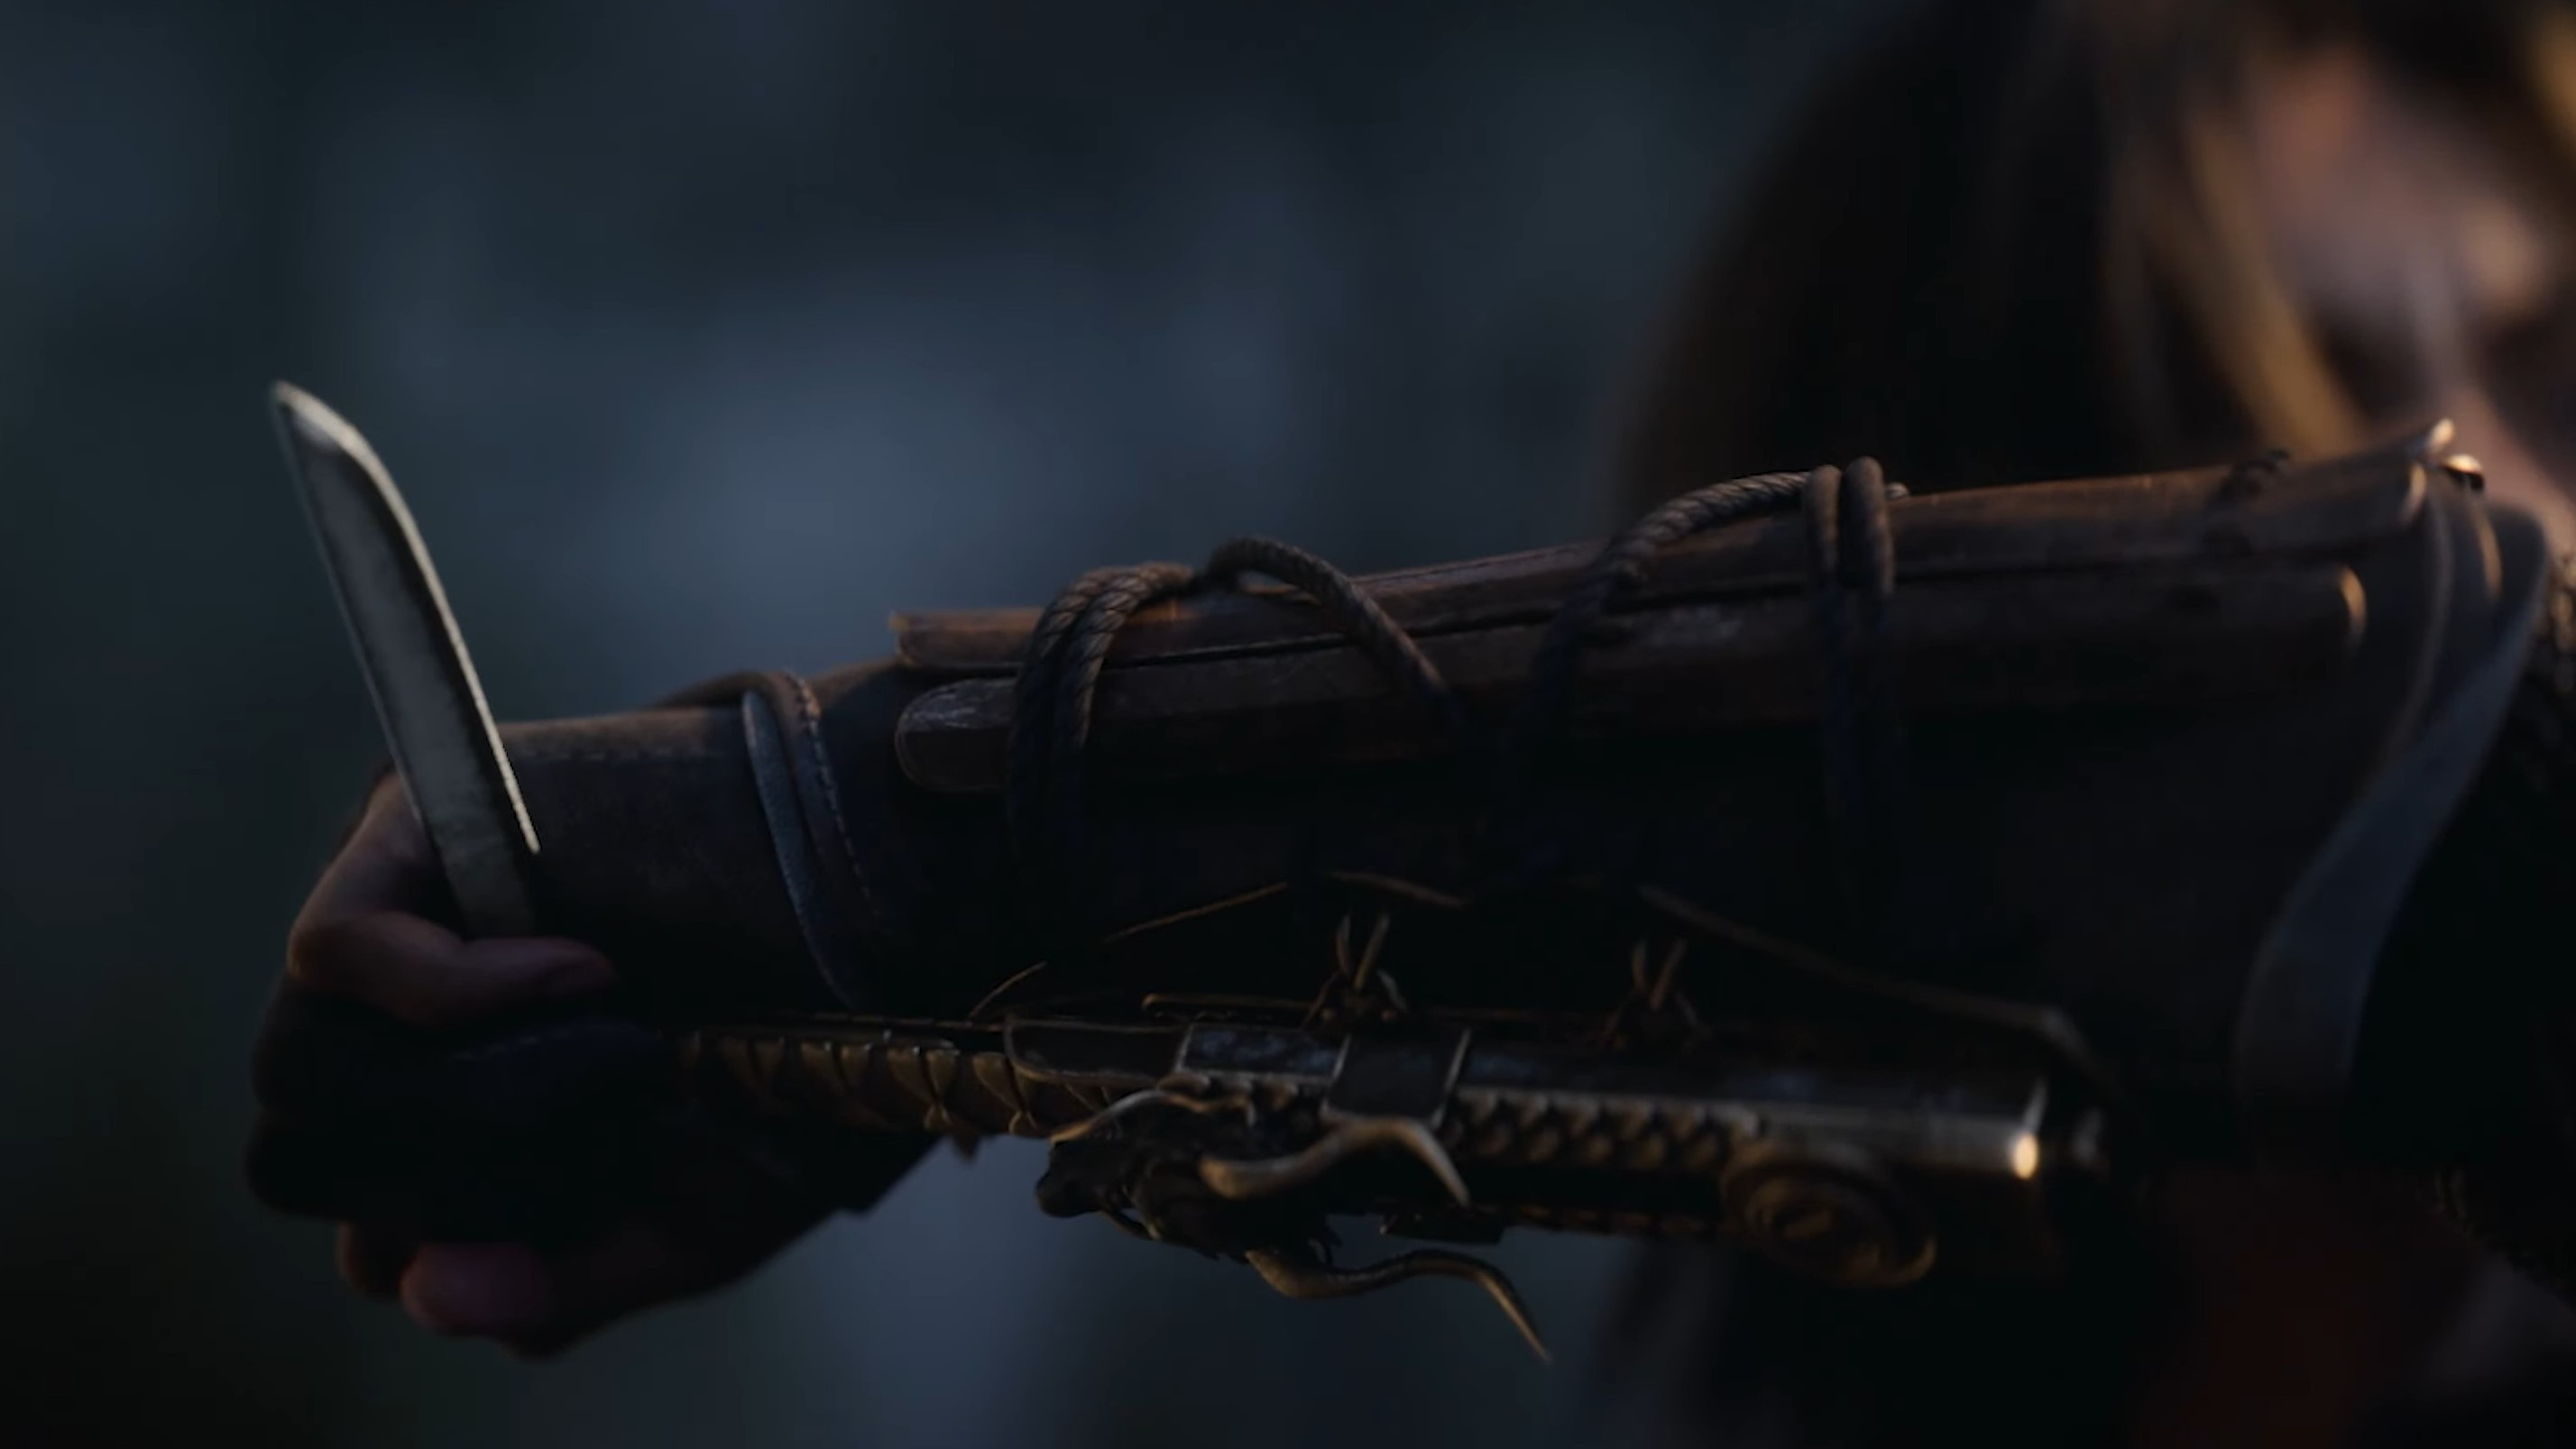 Assassin's Creed Shadows cinematic trailer shot showing a right-angled hidden blade